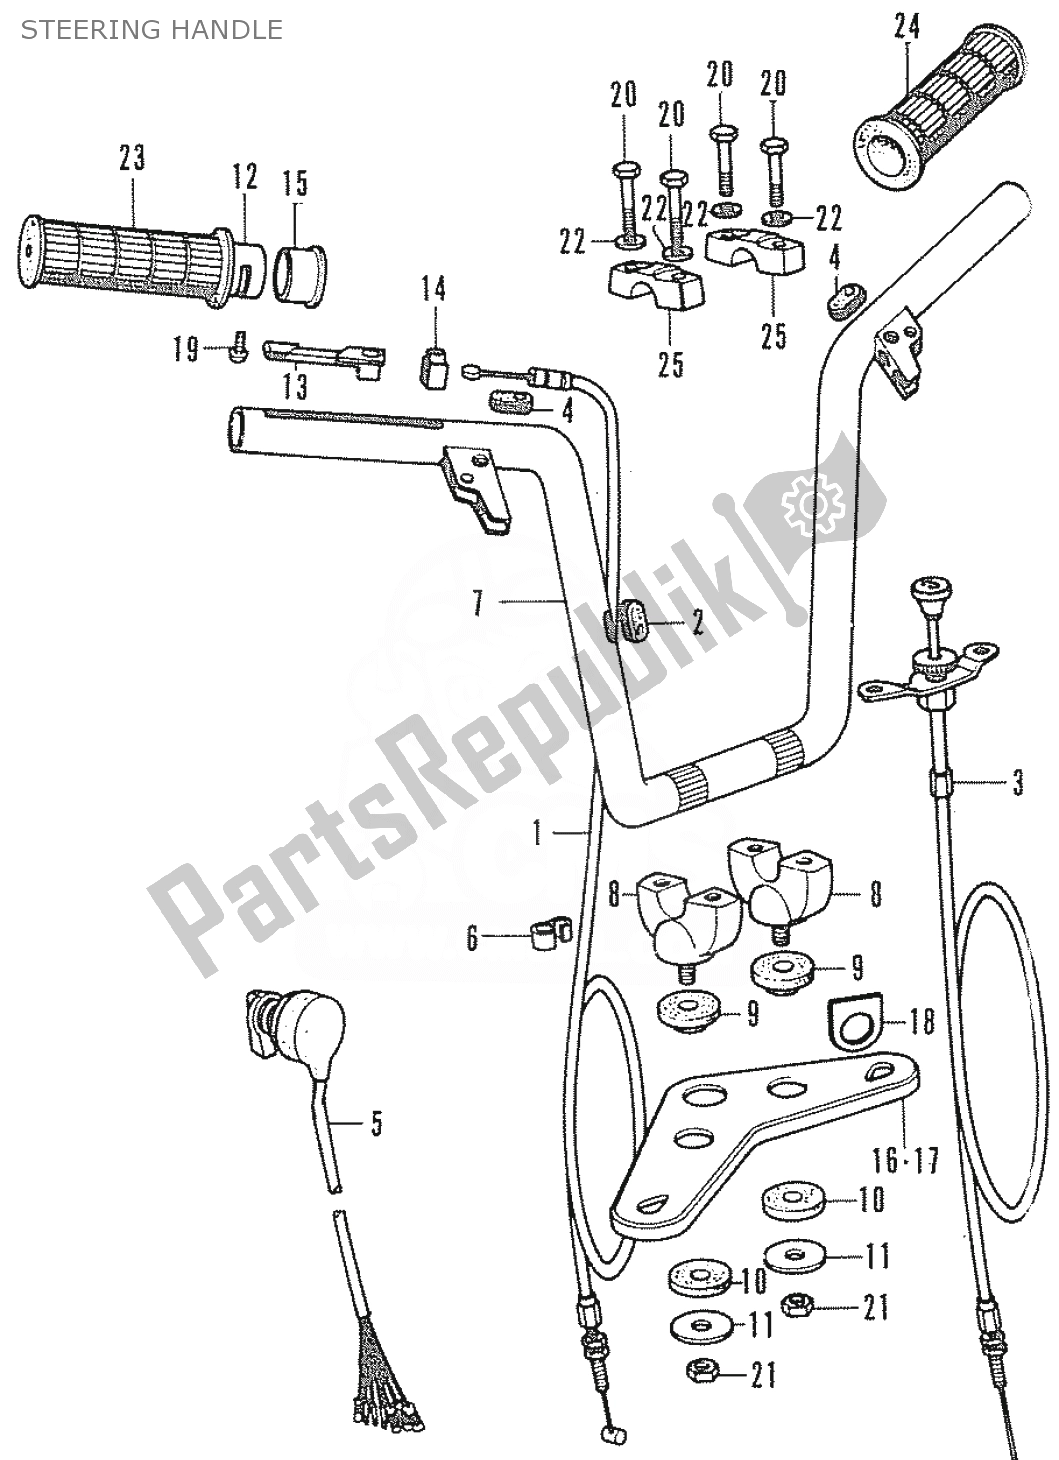 All parts for the Steering Handle of the Honda CF 70 Chaly 1950 - 2023